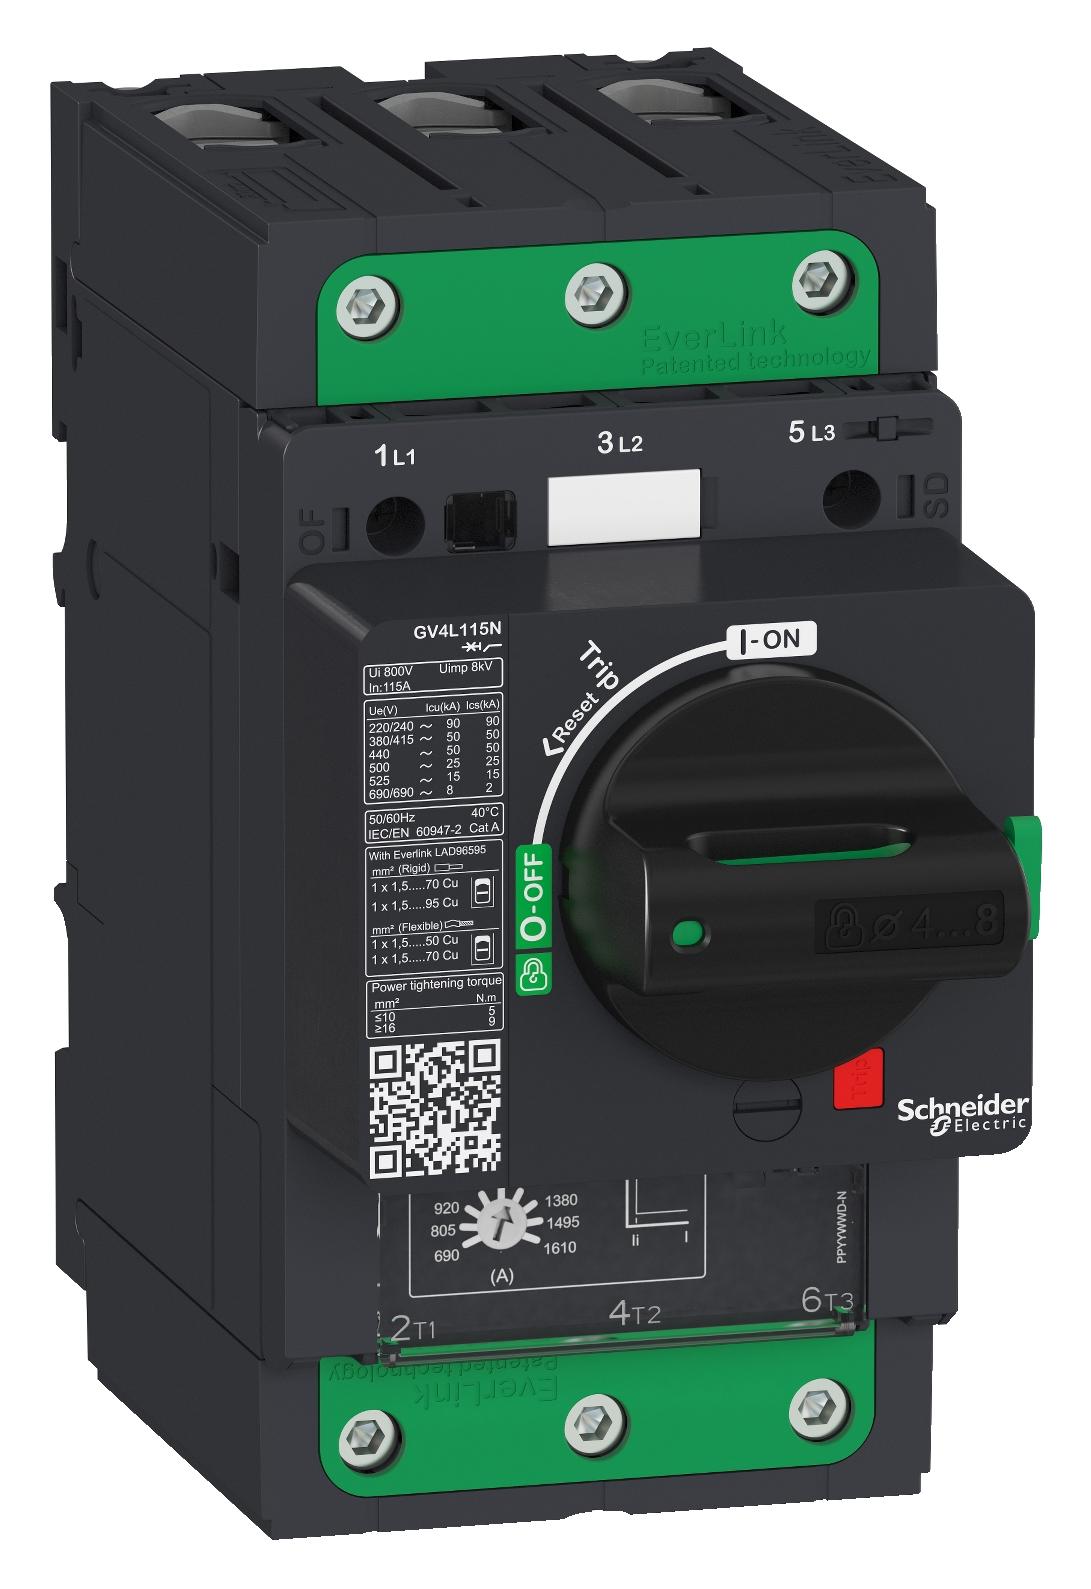 GV4L115B THERMOMAGNETIC CKT BREAKER, 3P, 115A SCHNEIDER ELECTRIC